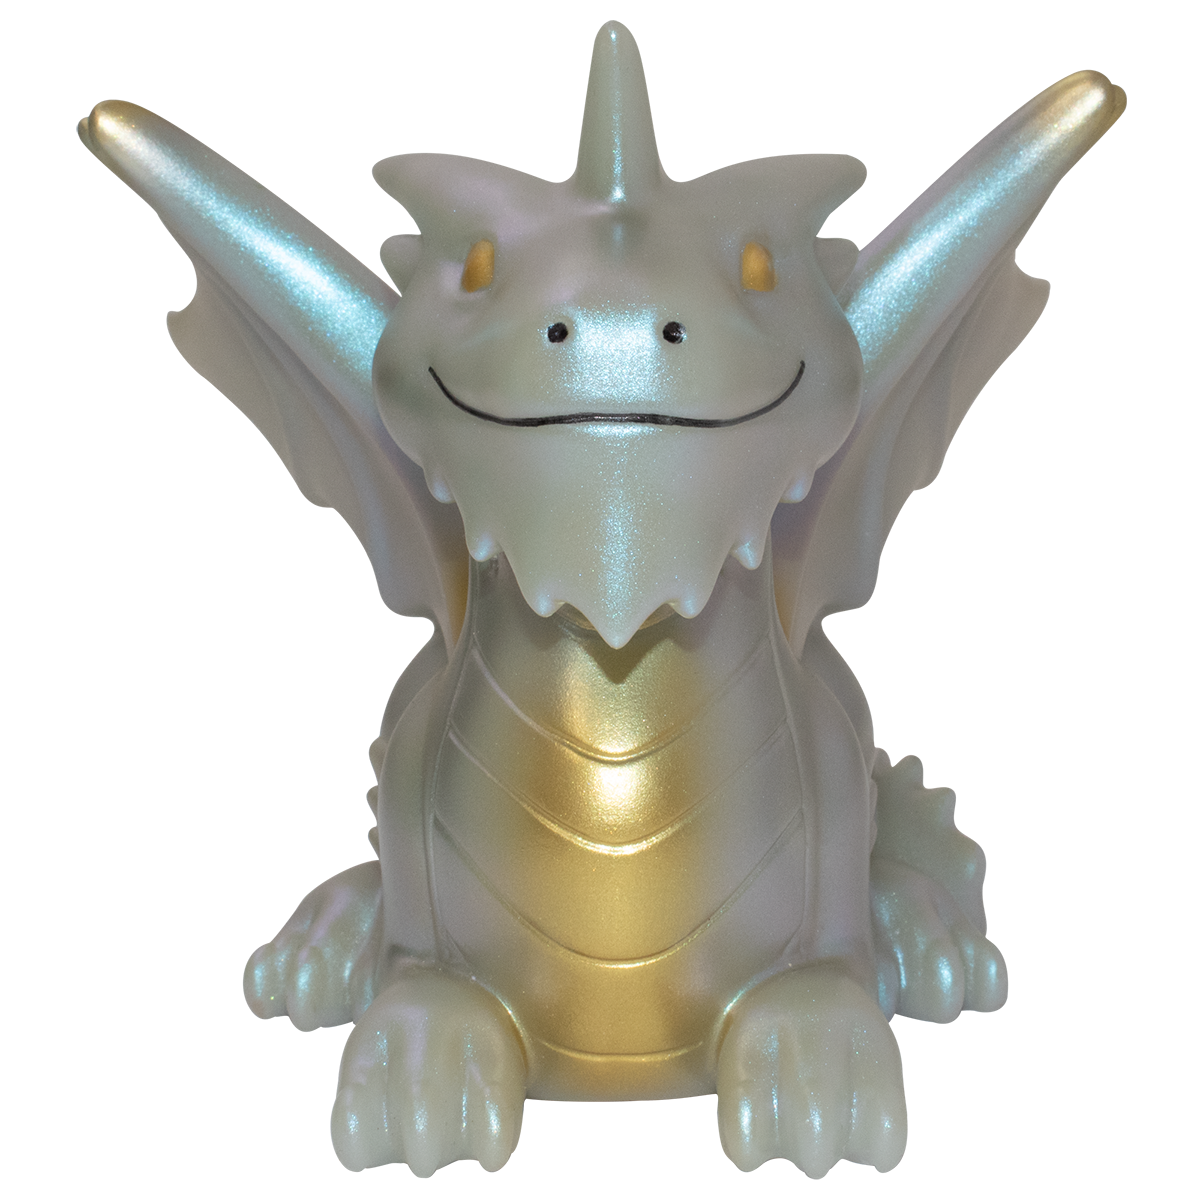 Figurines of Adorable Power: Dungeons & Dragons "Silver Dragon" | Ultra PRO International